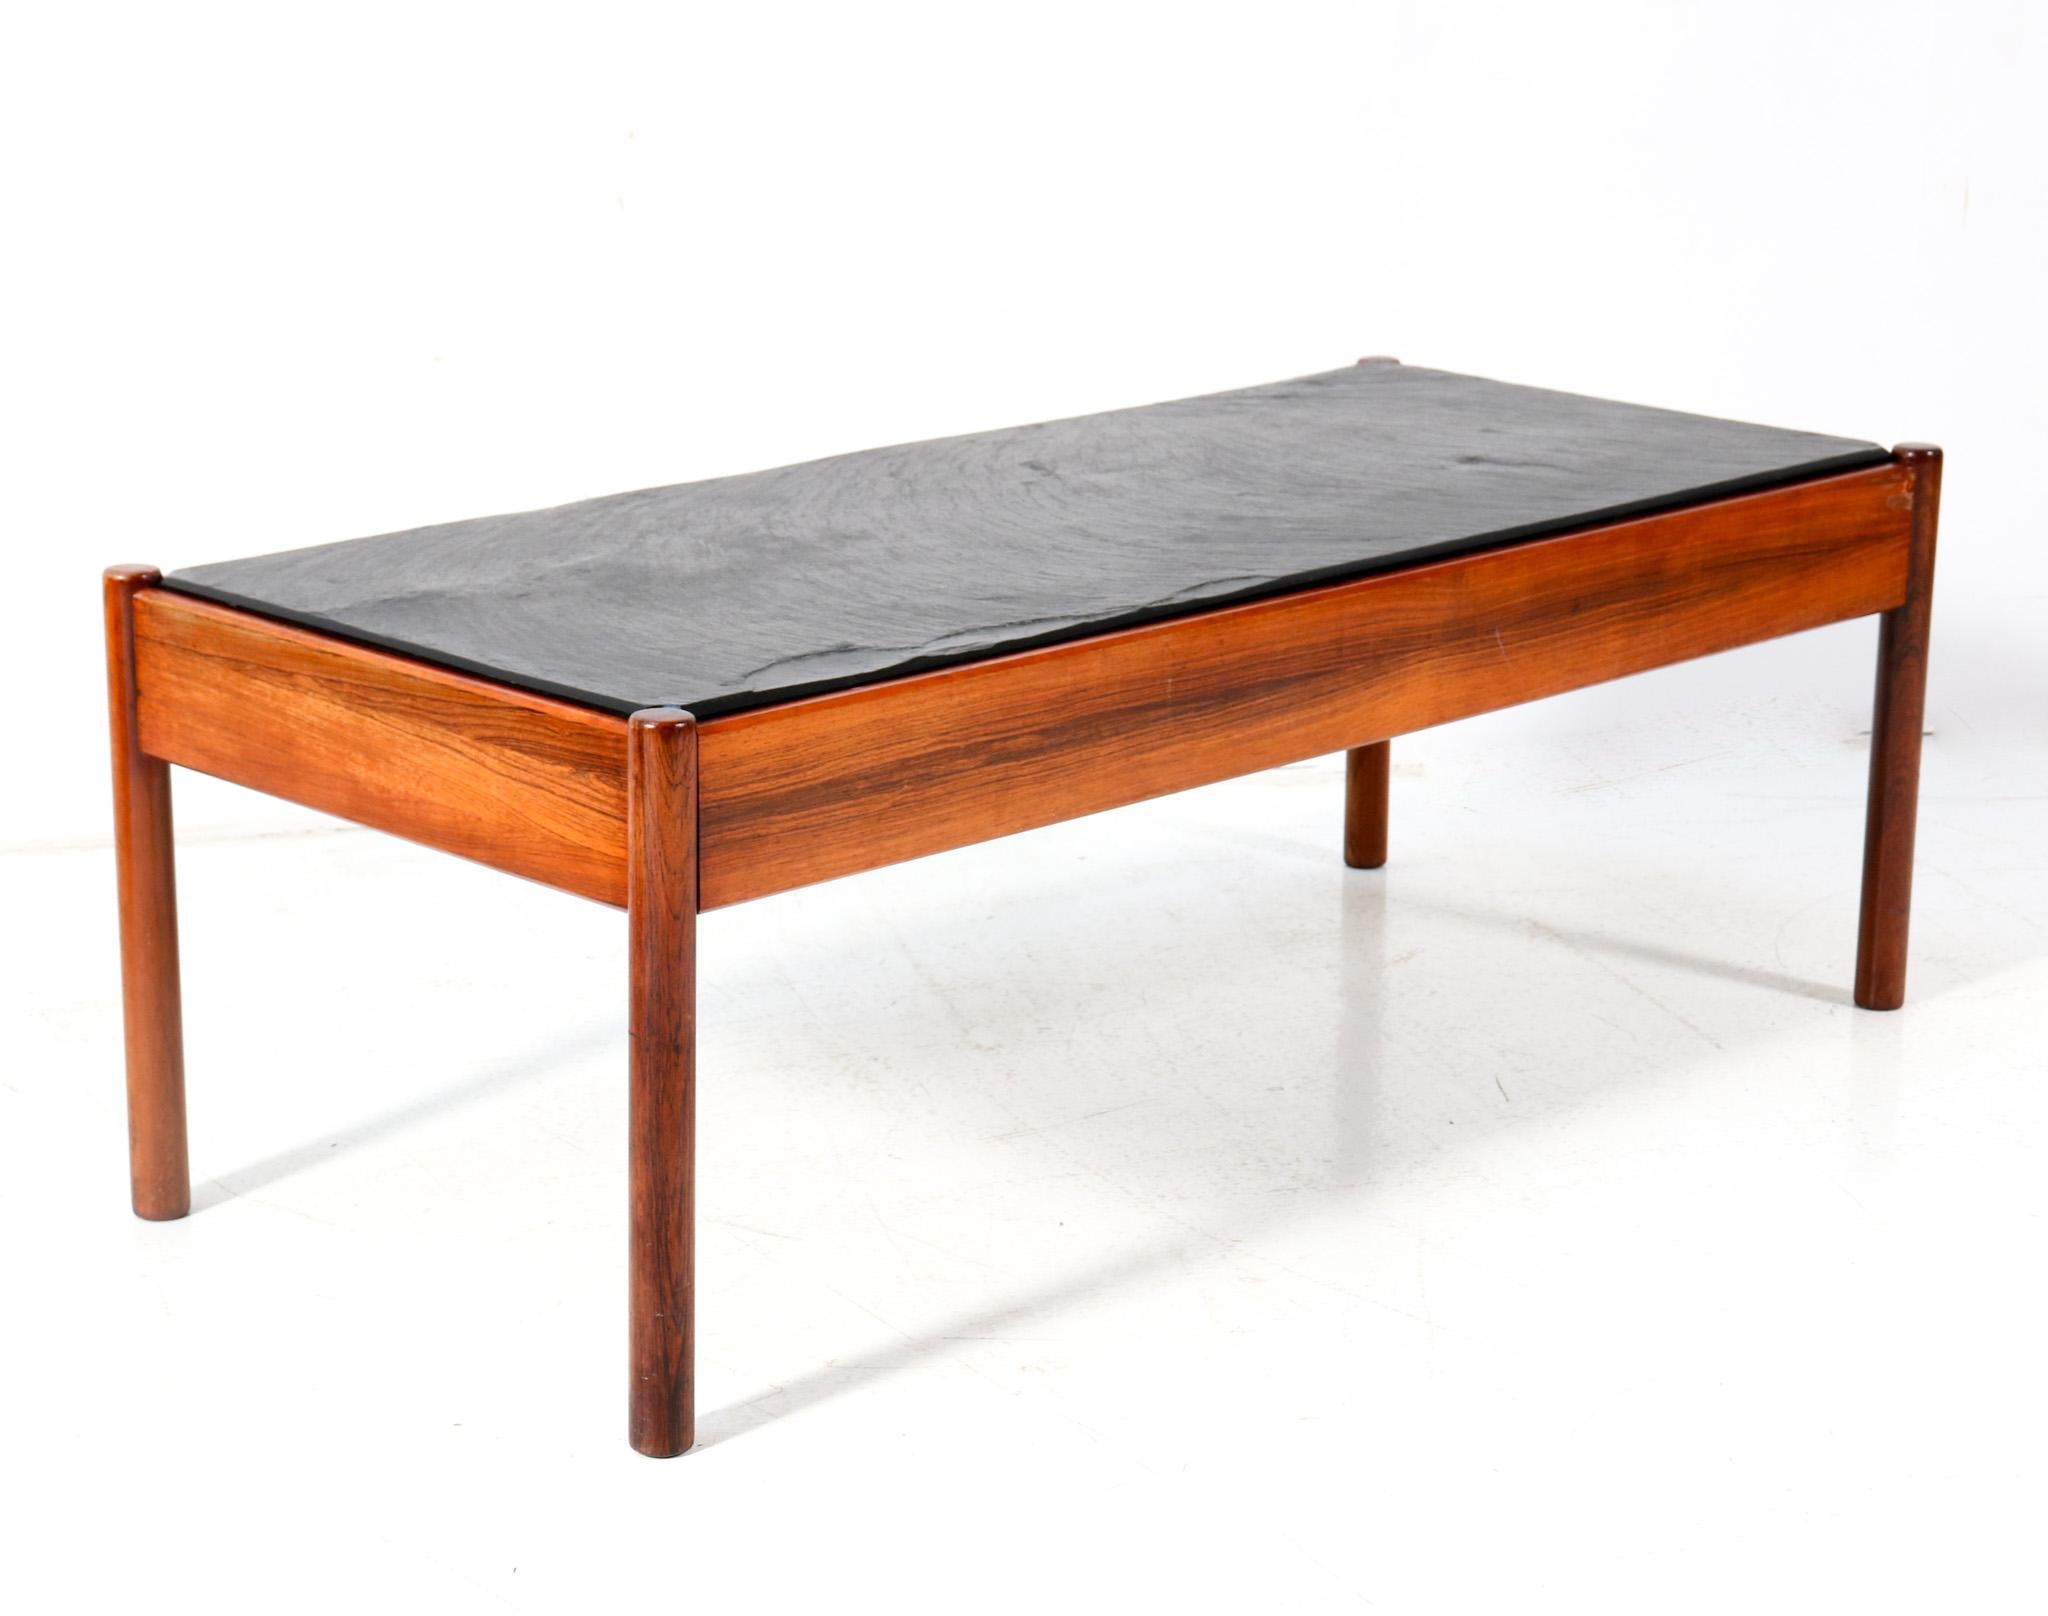 Dutch Teak Mid-Century Modern Coffee table with Slate Top, 1960s For Sale